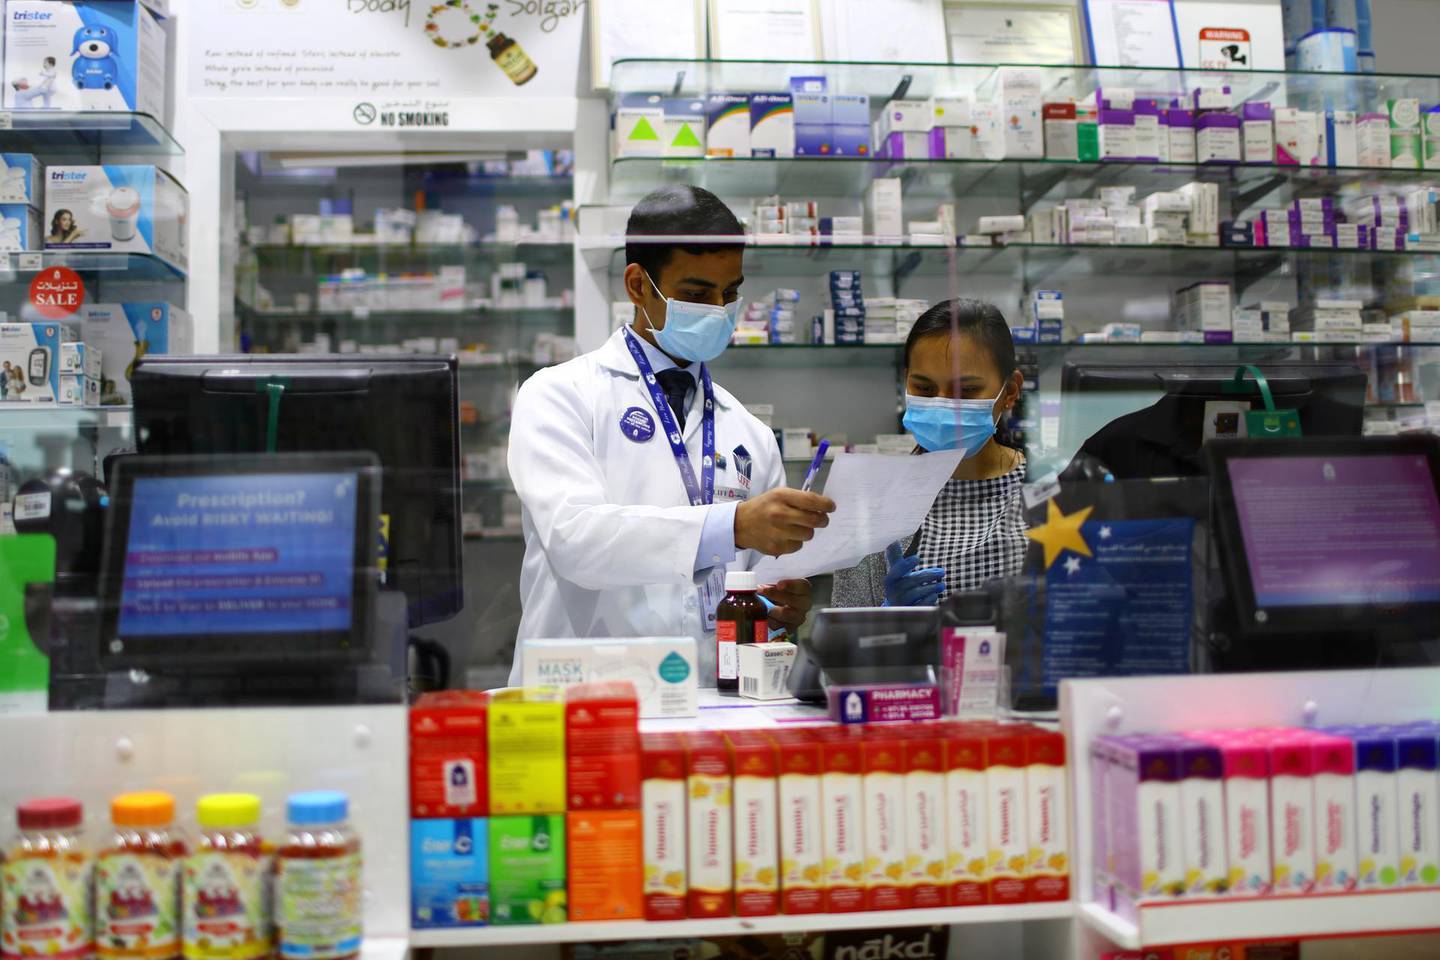 Pharmacists are seen behind a counter covered by glass, during the 24 hour lockdown to counter the coronavirus (Covid-19) outbreak in Dubai, United Arab Emirates April 6, 2020. REUTERS/Ahmed Jadallah